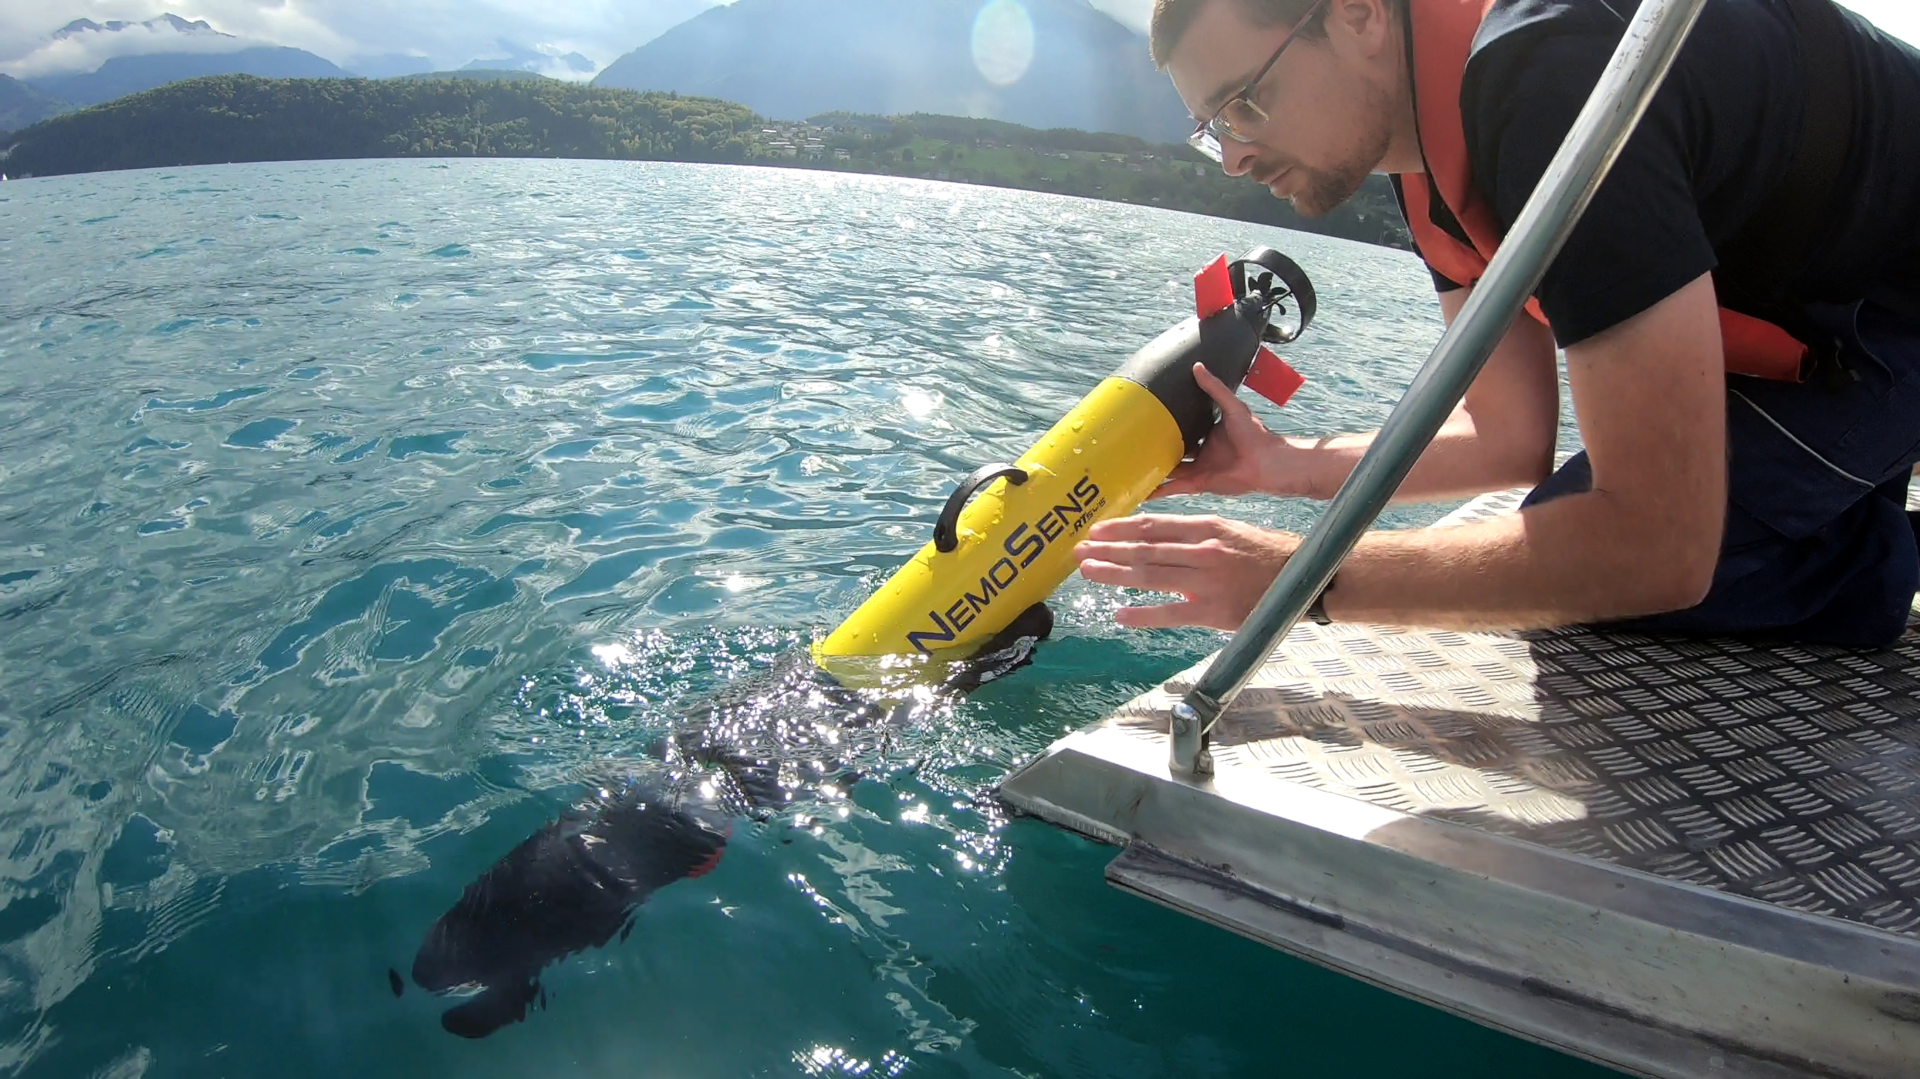 The NemoSens AUV is deployed by one person from a platform.